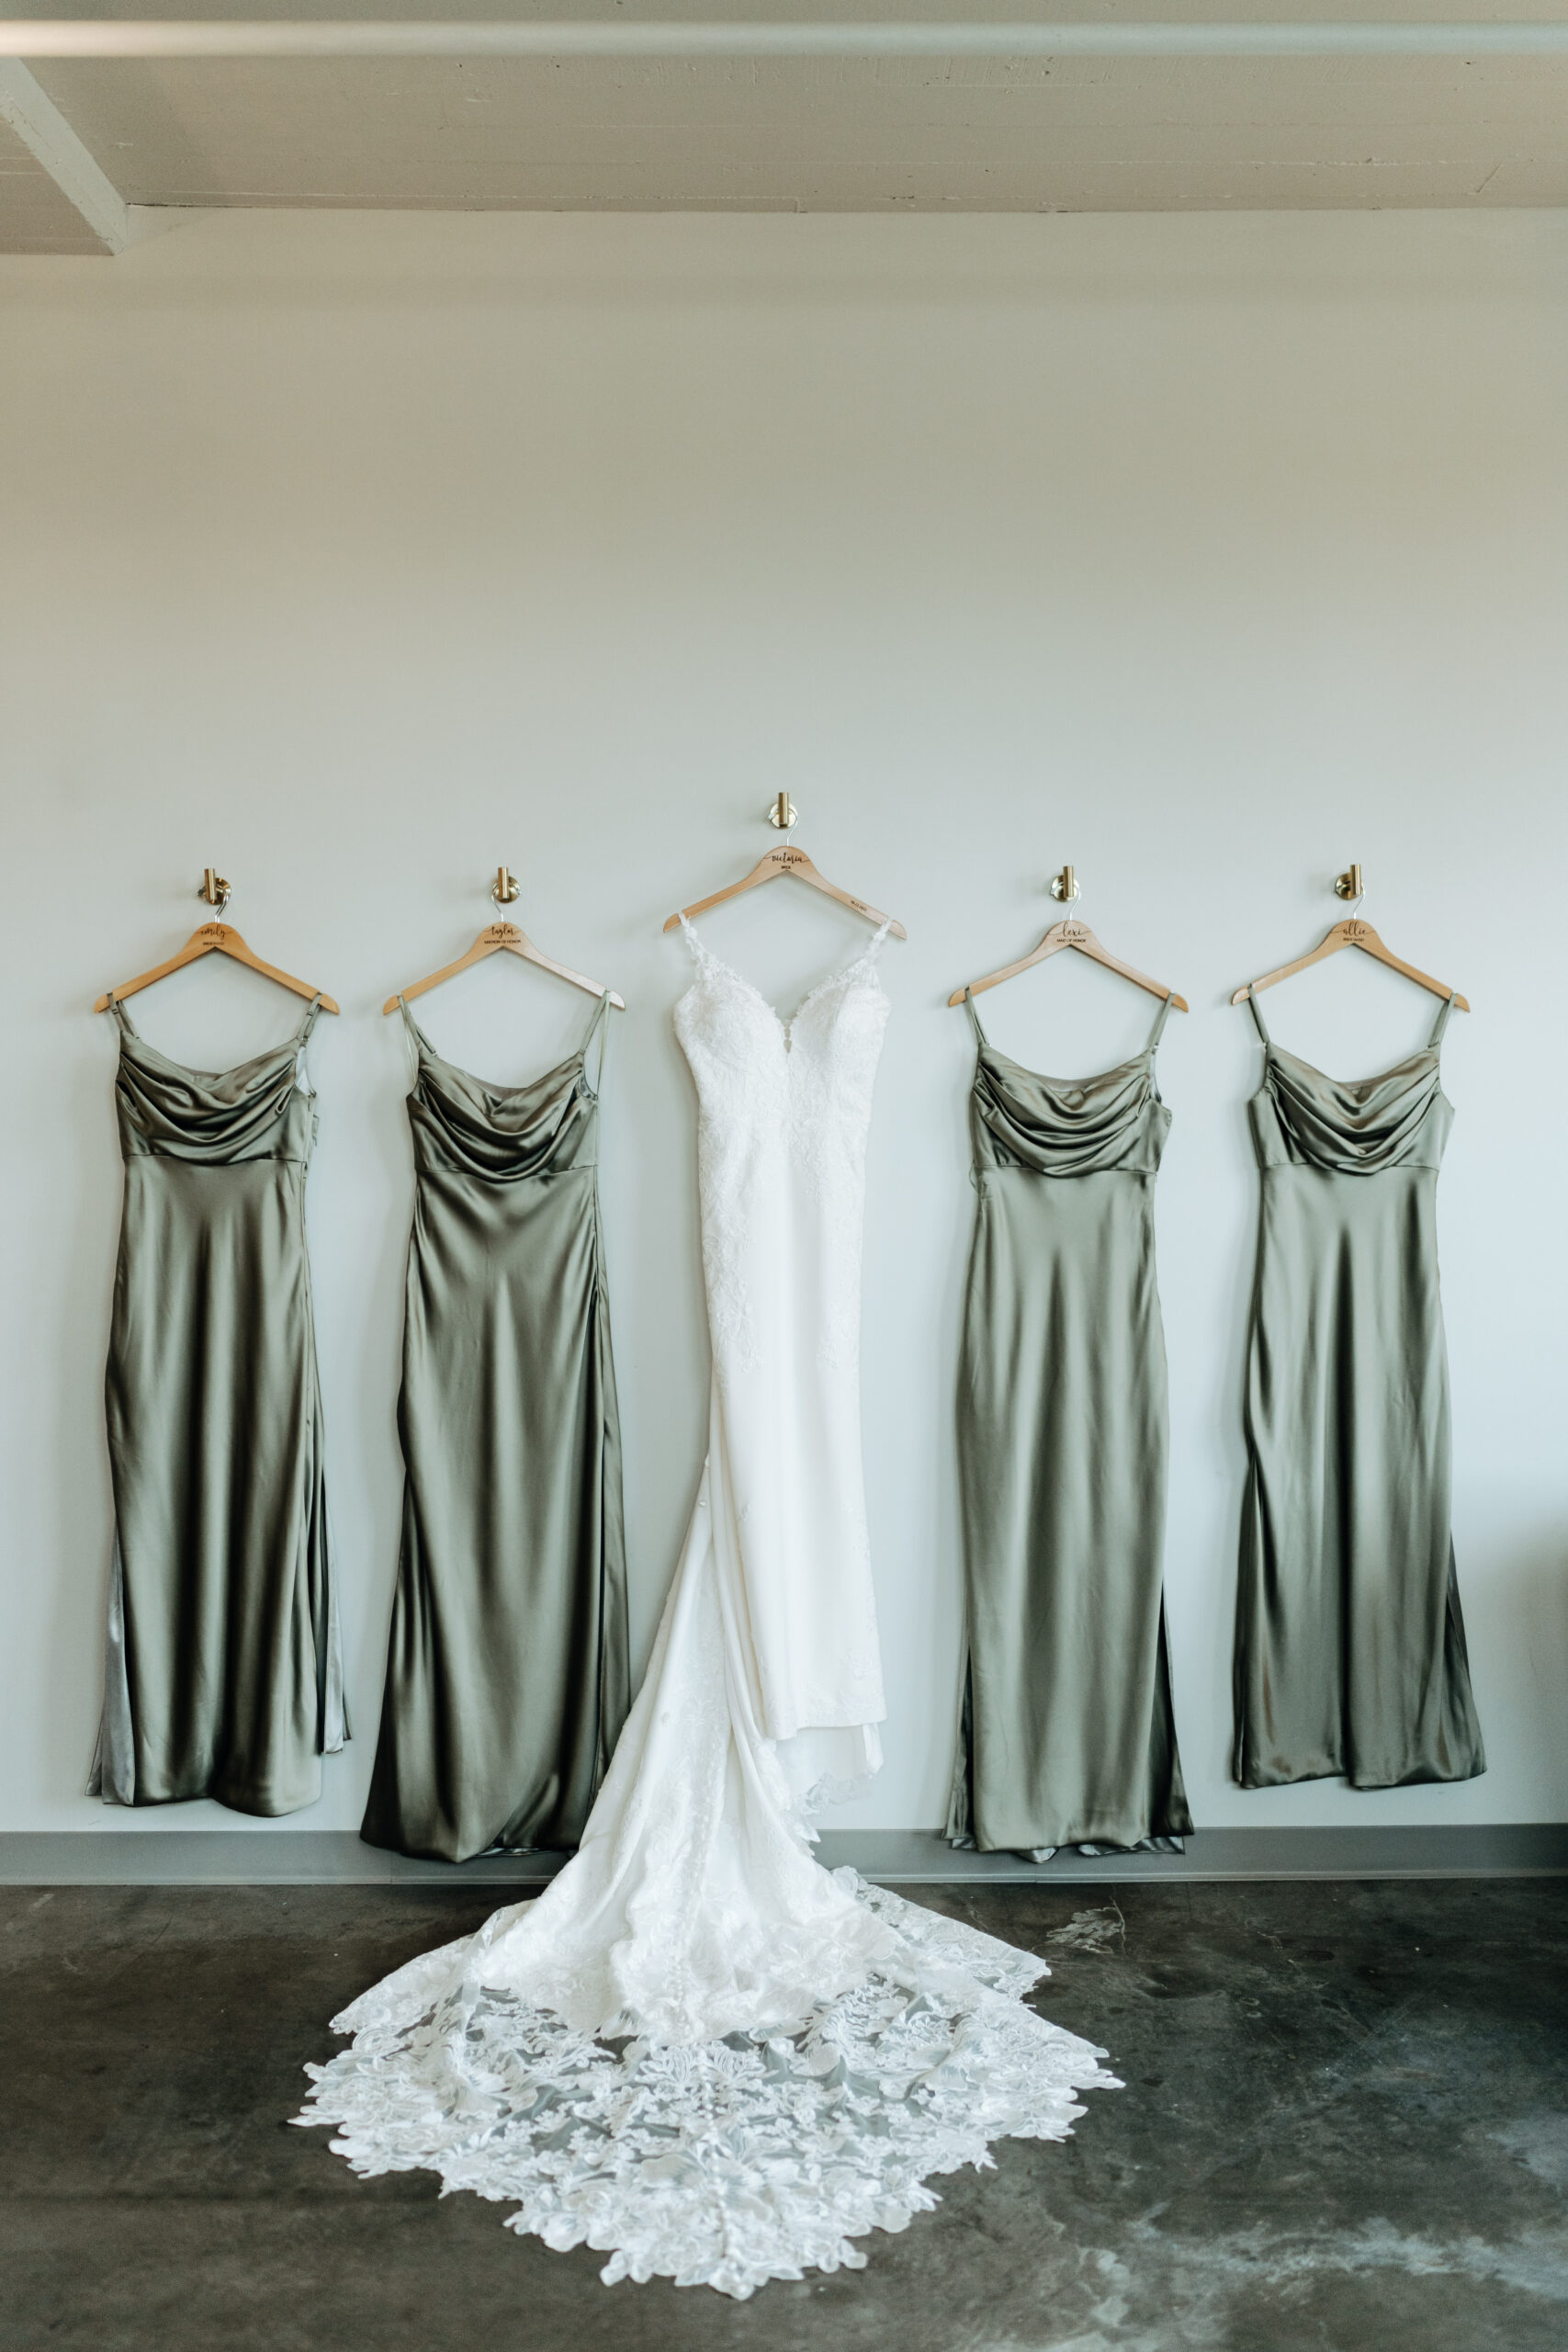 This is a picture of a wedding dress with bridesmaid dresses next to it